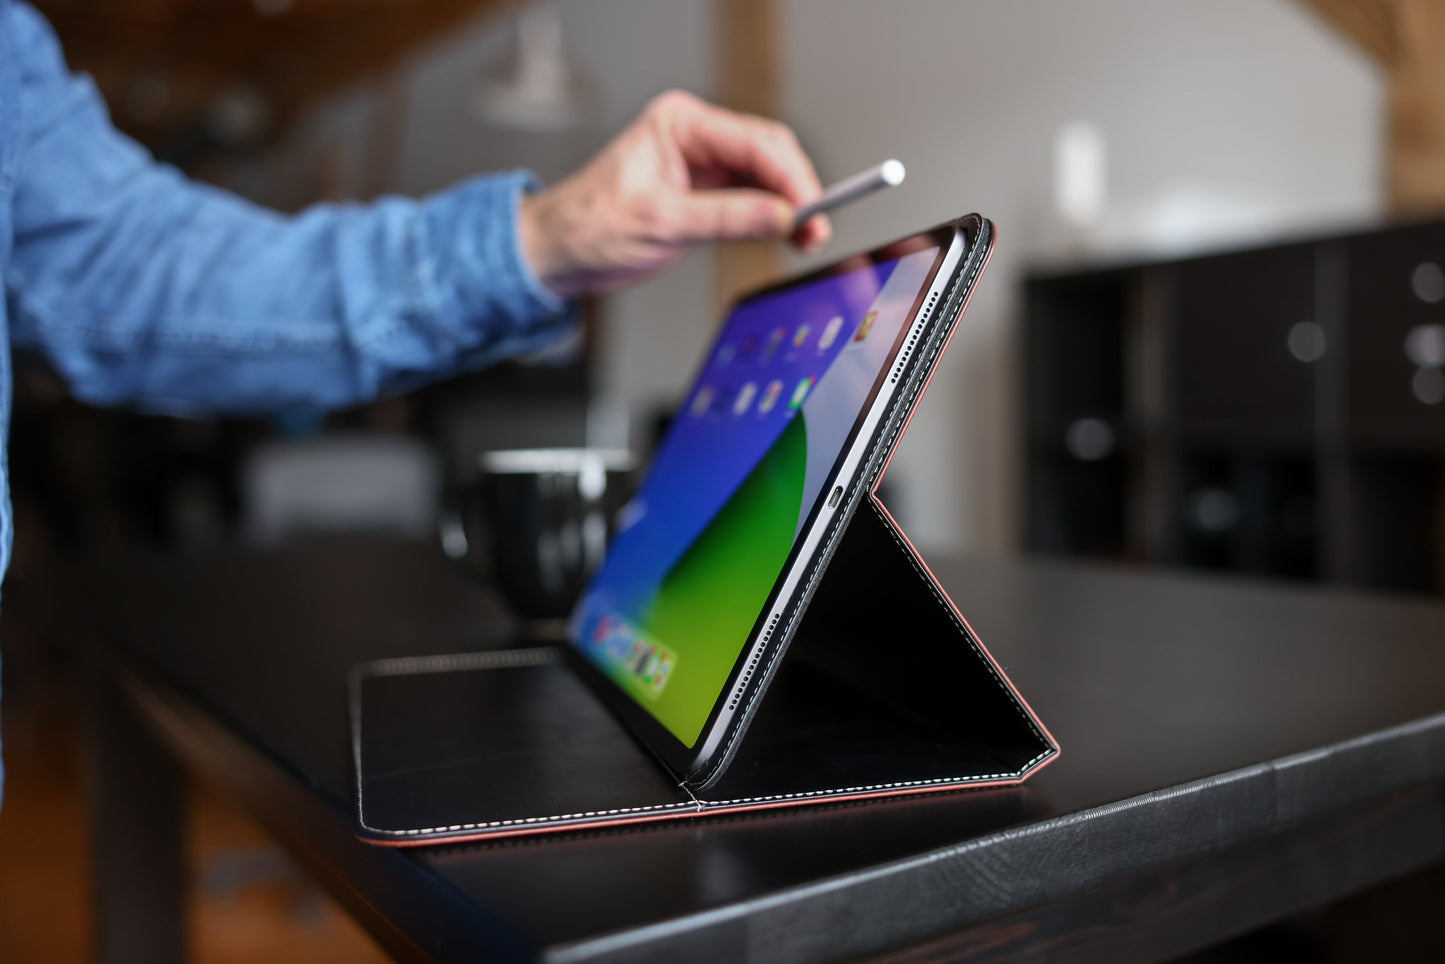 Magnetic Leather Case For iPad Pro 12.9"